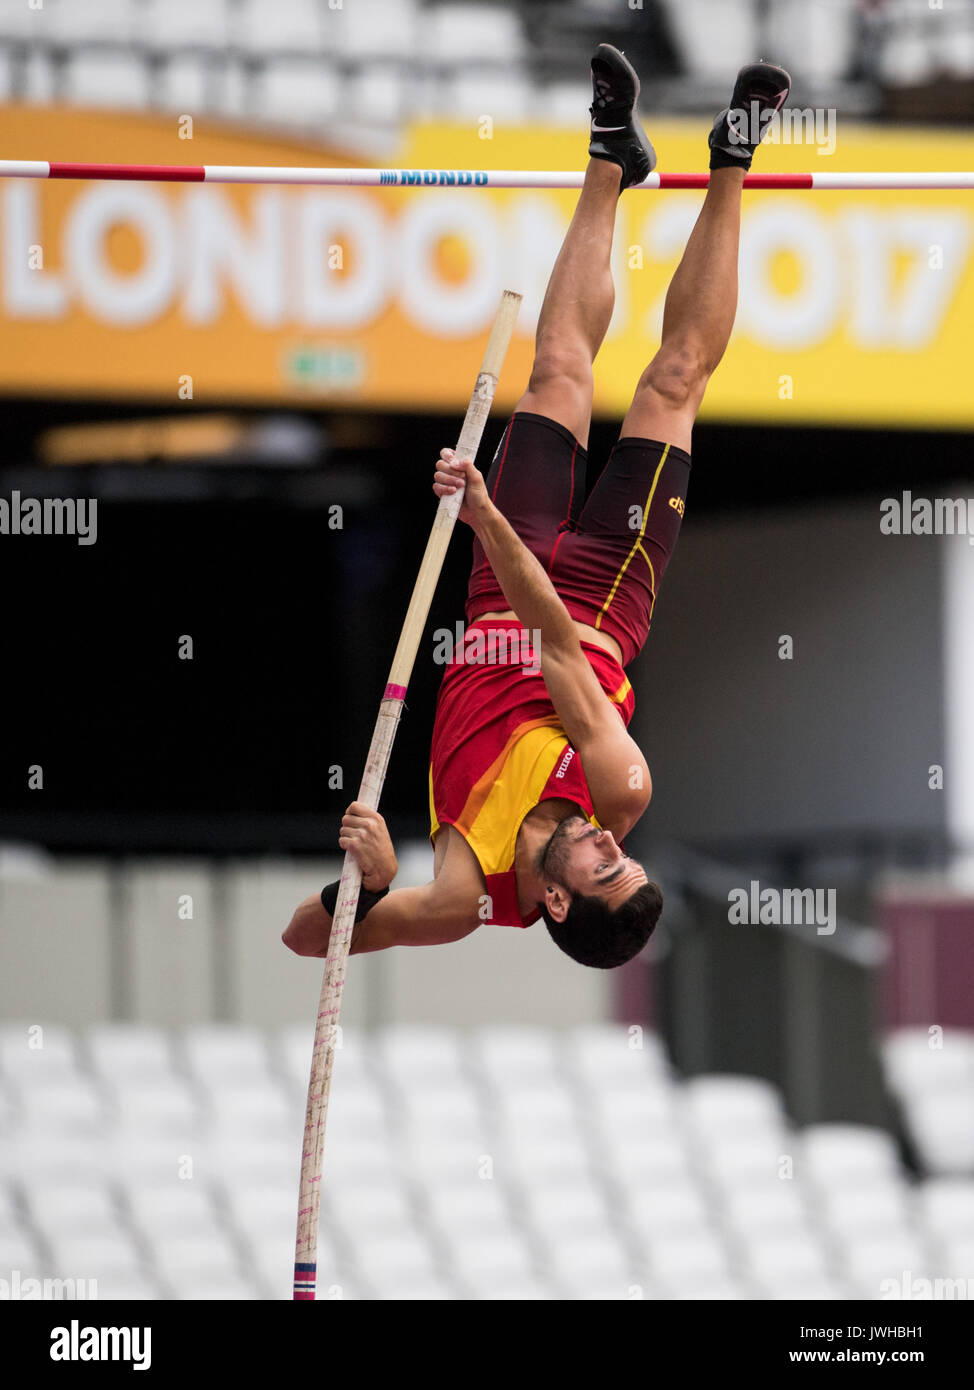 London, UK. 12th Aug, 2017. Spanish athlete Jorge Urena competes in the men's pole-vaulting decathlon event at the IAAF World Championships in London, UK, 12 August 2017. Photo: Bernd Thissen/dpa/Alamy Live News Stock Photo